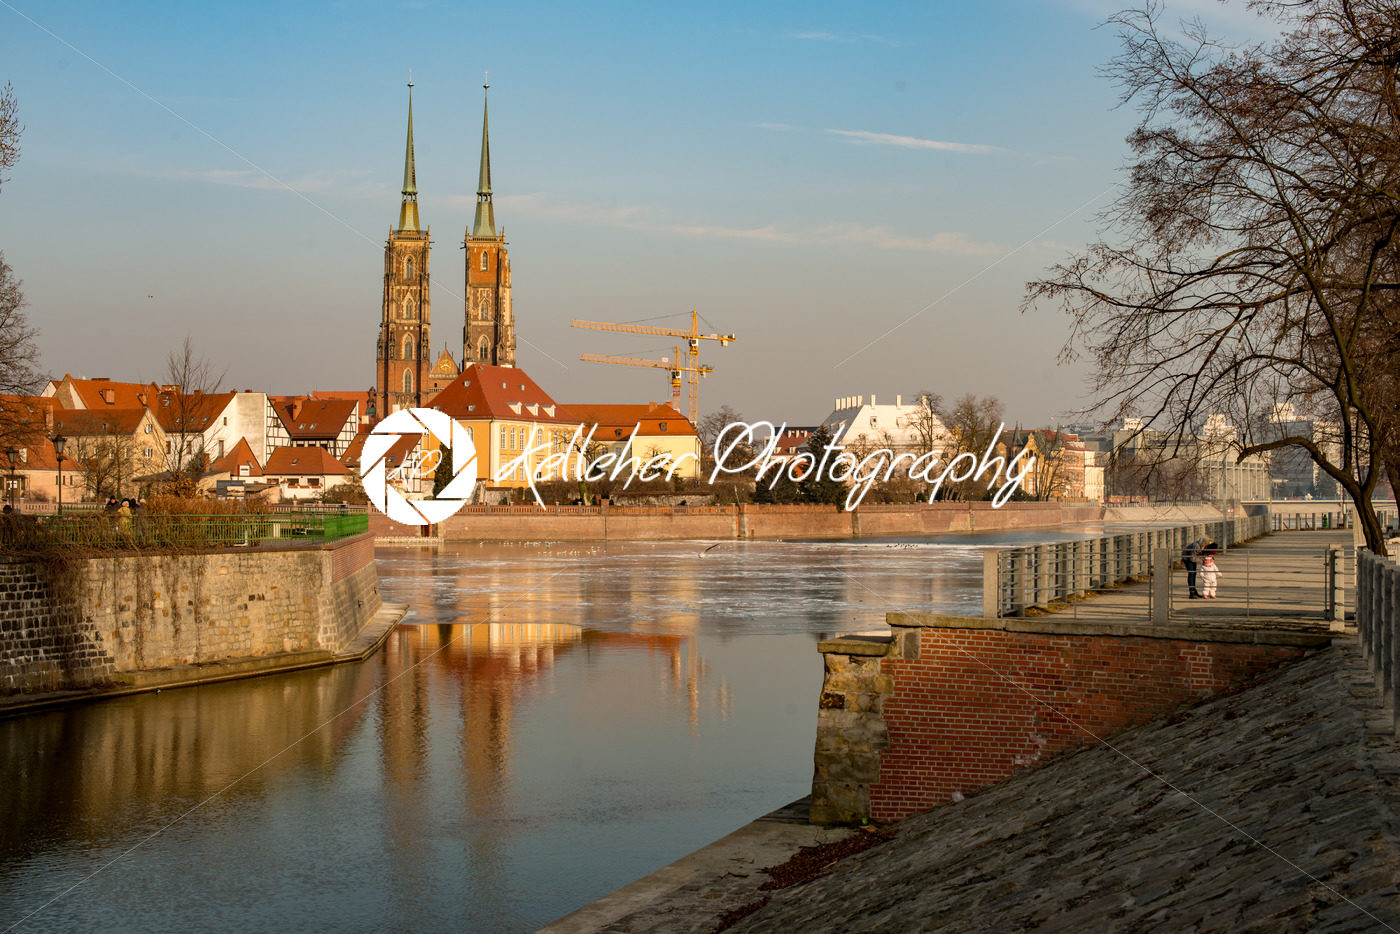 Wroclaw, Poland – March 4, 2018: Wroclaw Old Town historic area in the evening. - Kelleher Photography Store